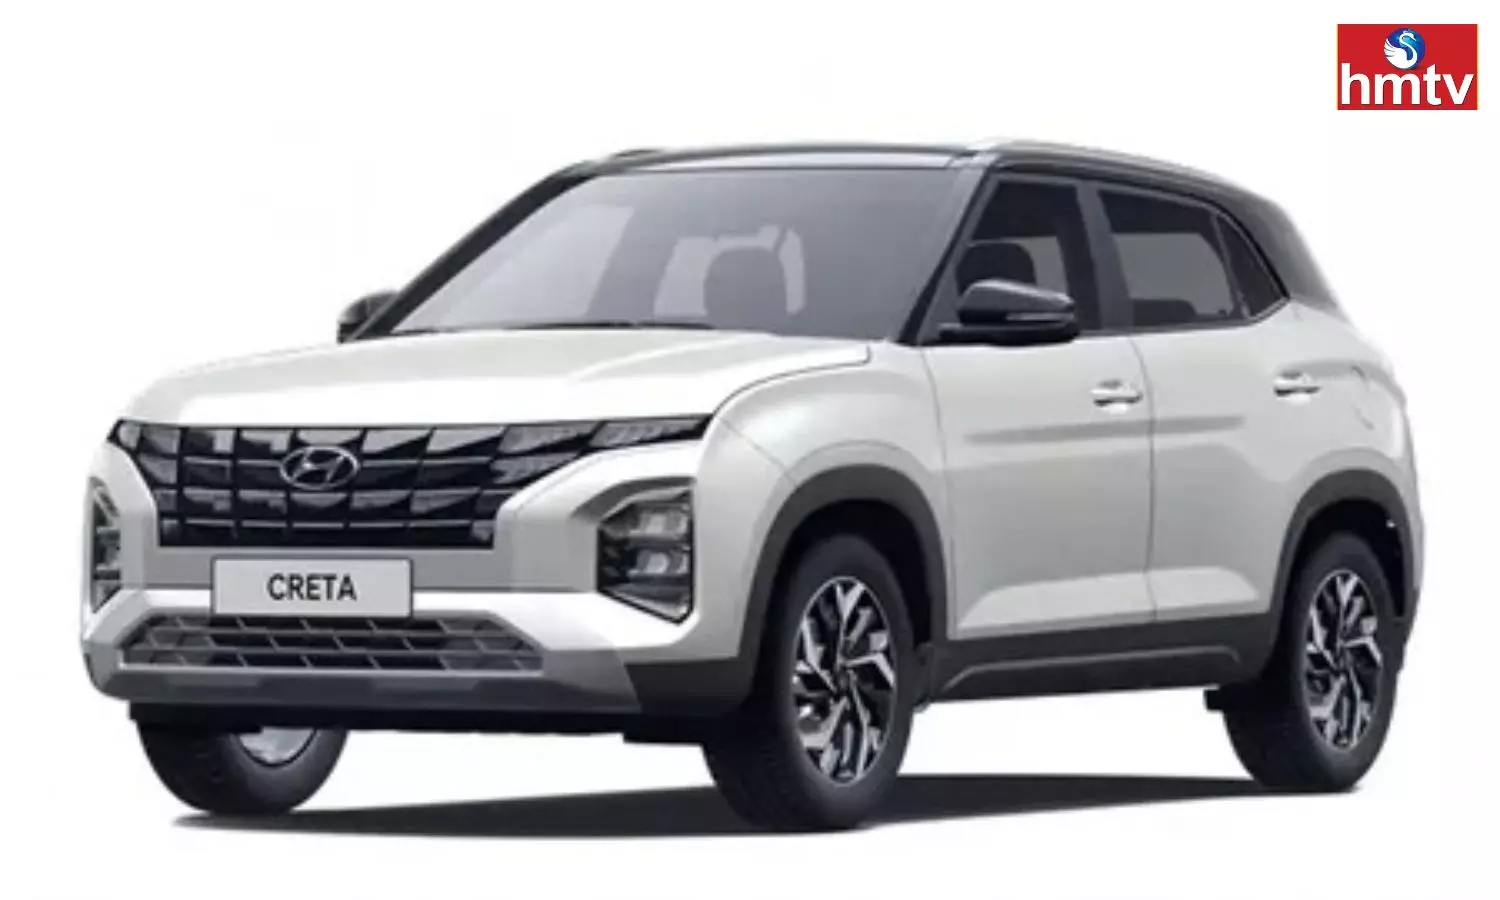 Hyundai Creta Launched in India Price Features Specifications Engine Colour Variants Booking Delivery and More Details